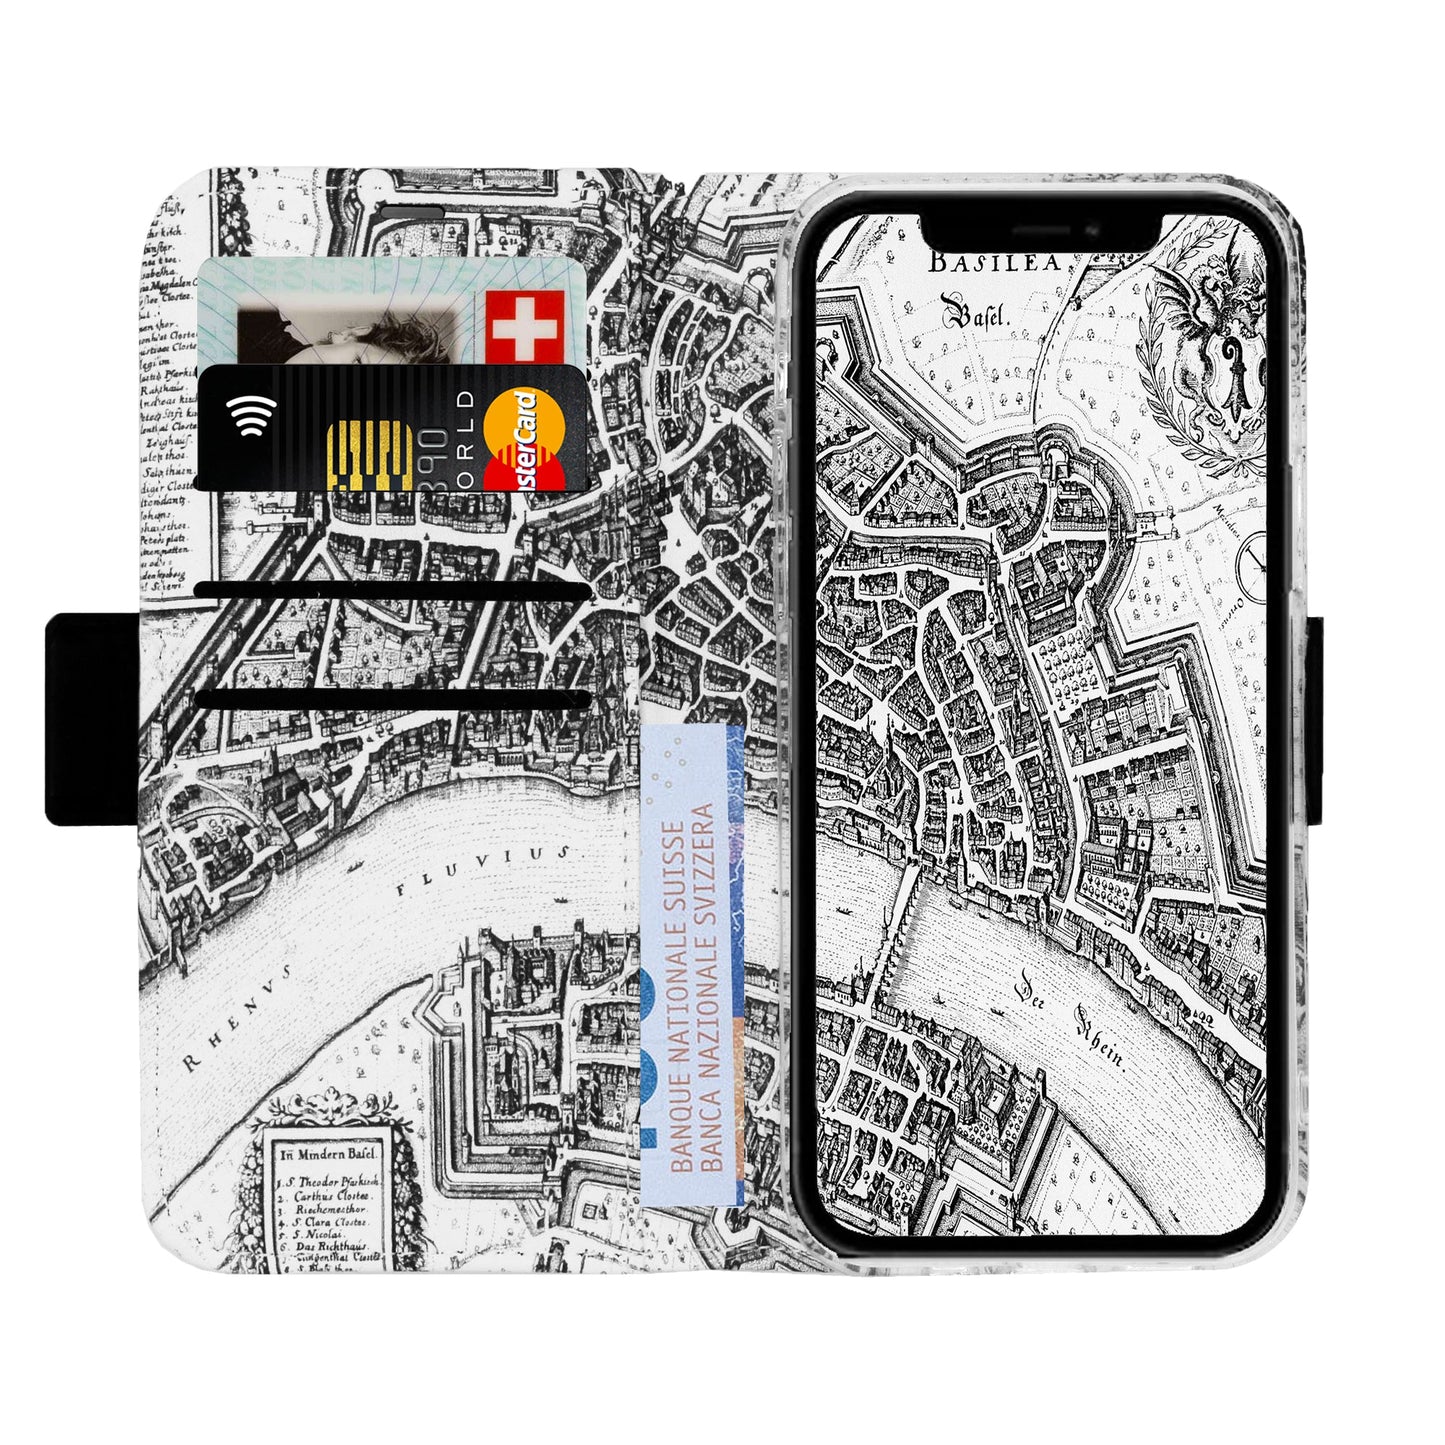 Basel Merian Victor Case for iPhone 11 Pro Max